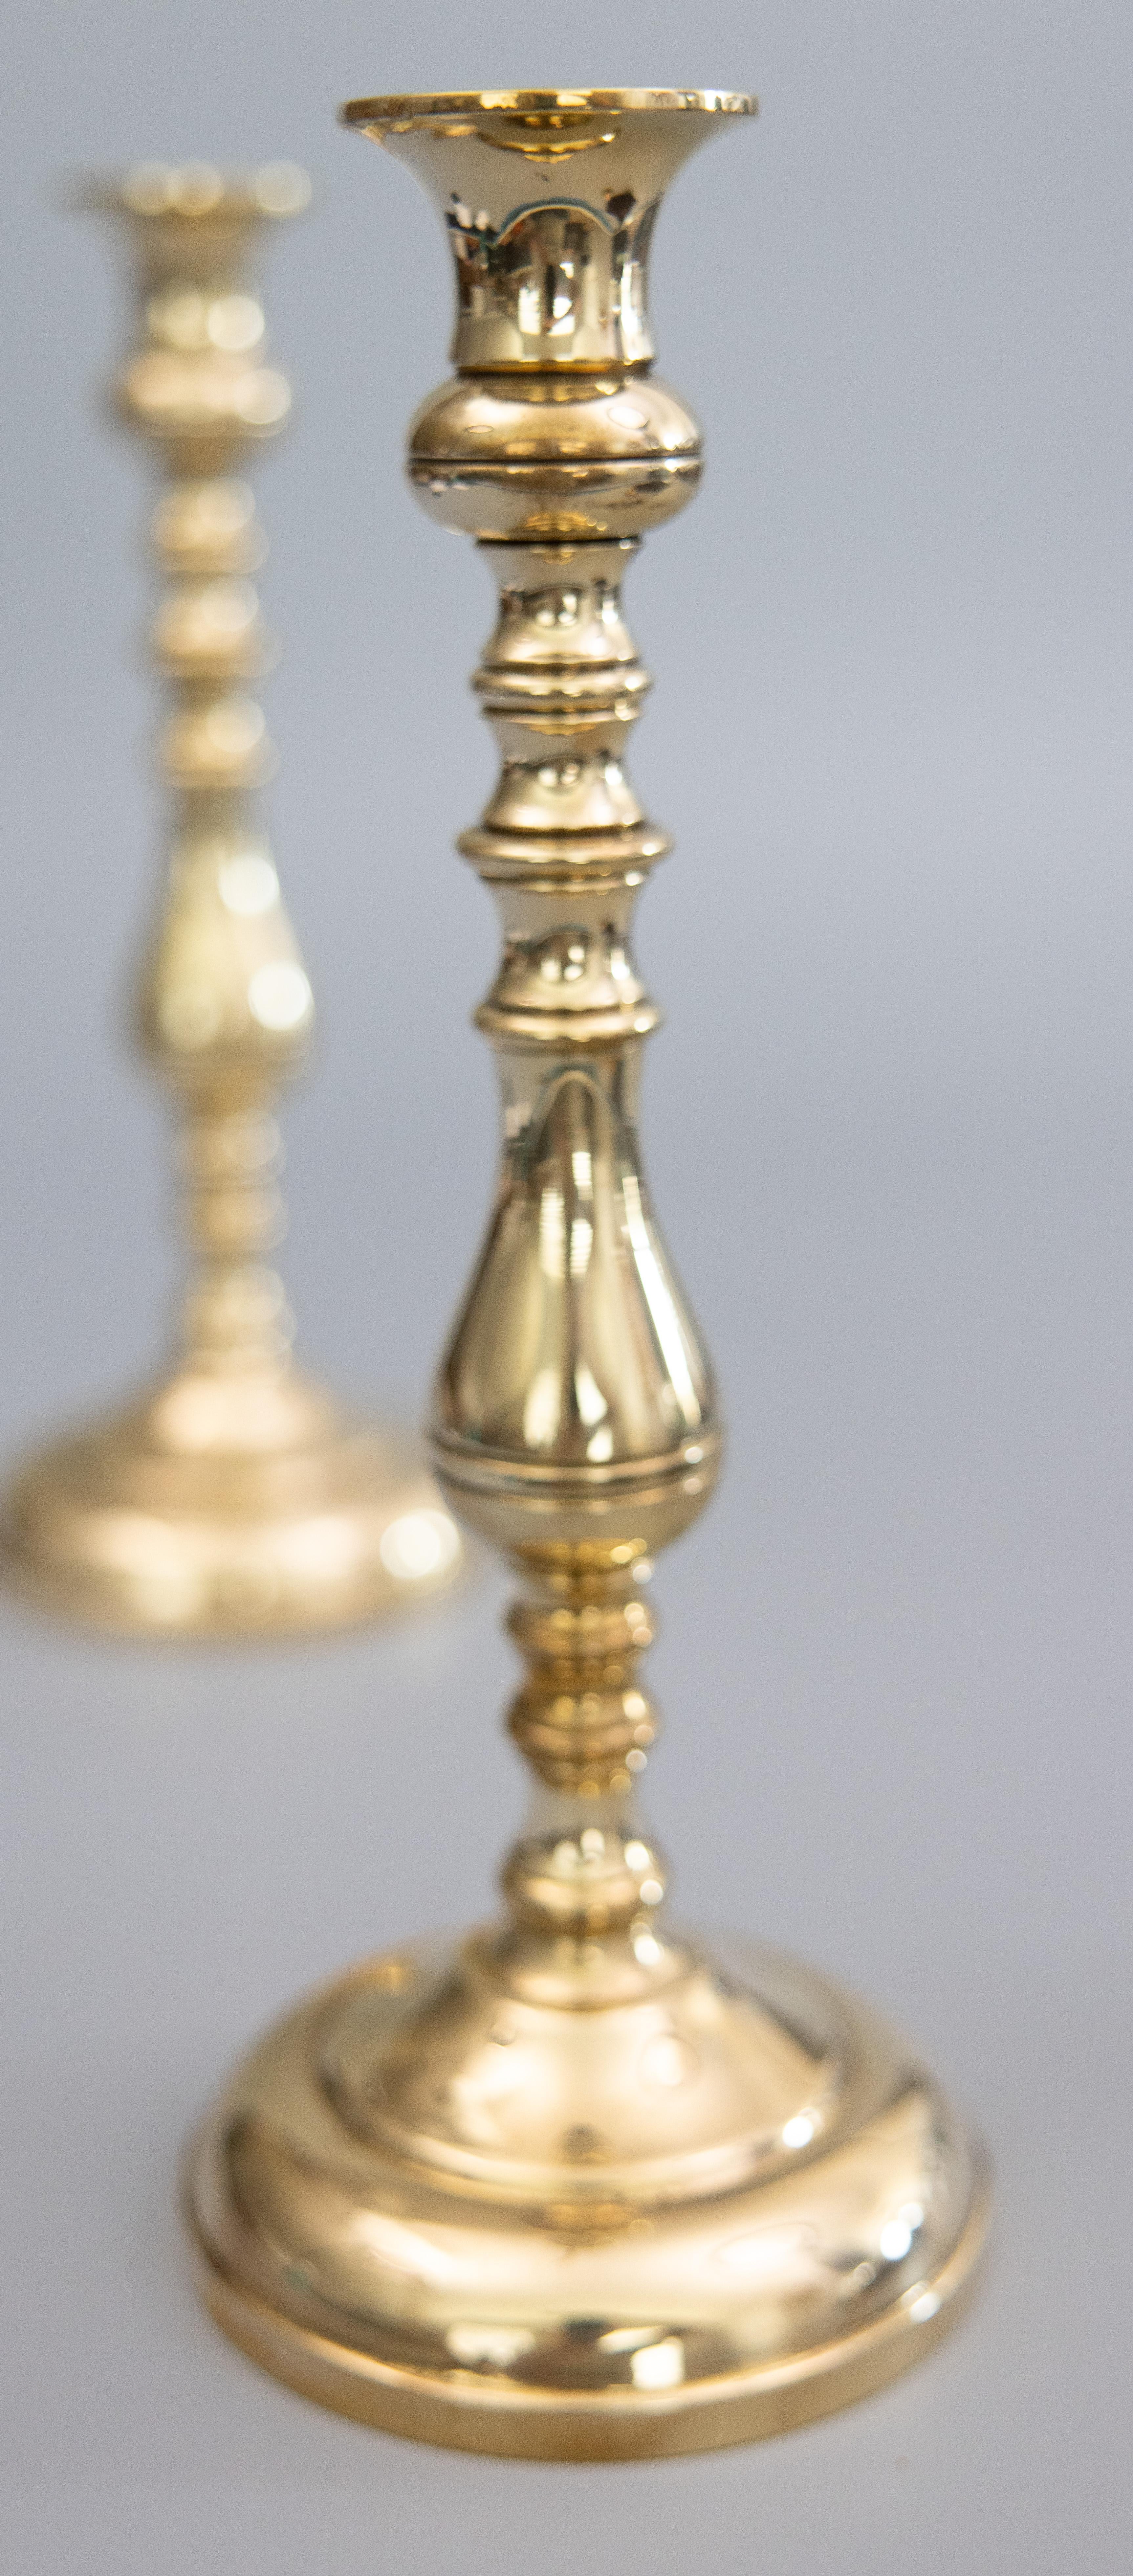 Pair of 19th Century English Queen Anne Style Polished Brass Candlesticks In Good Condition For Sale In Pearland, TX